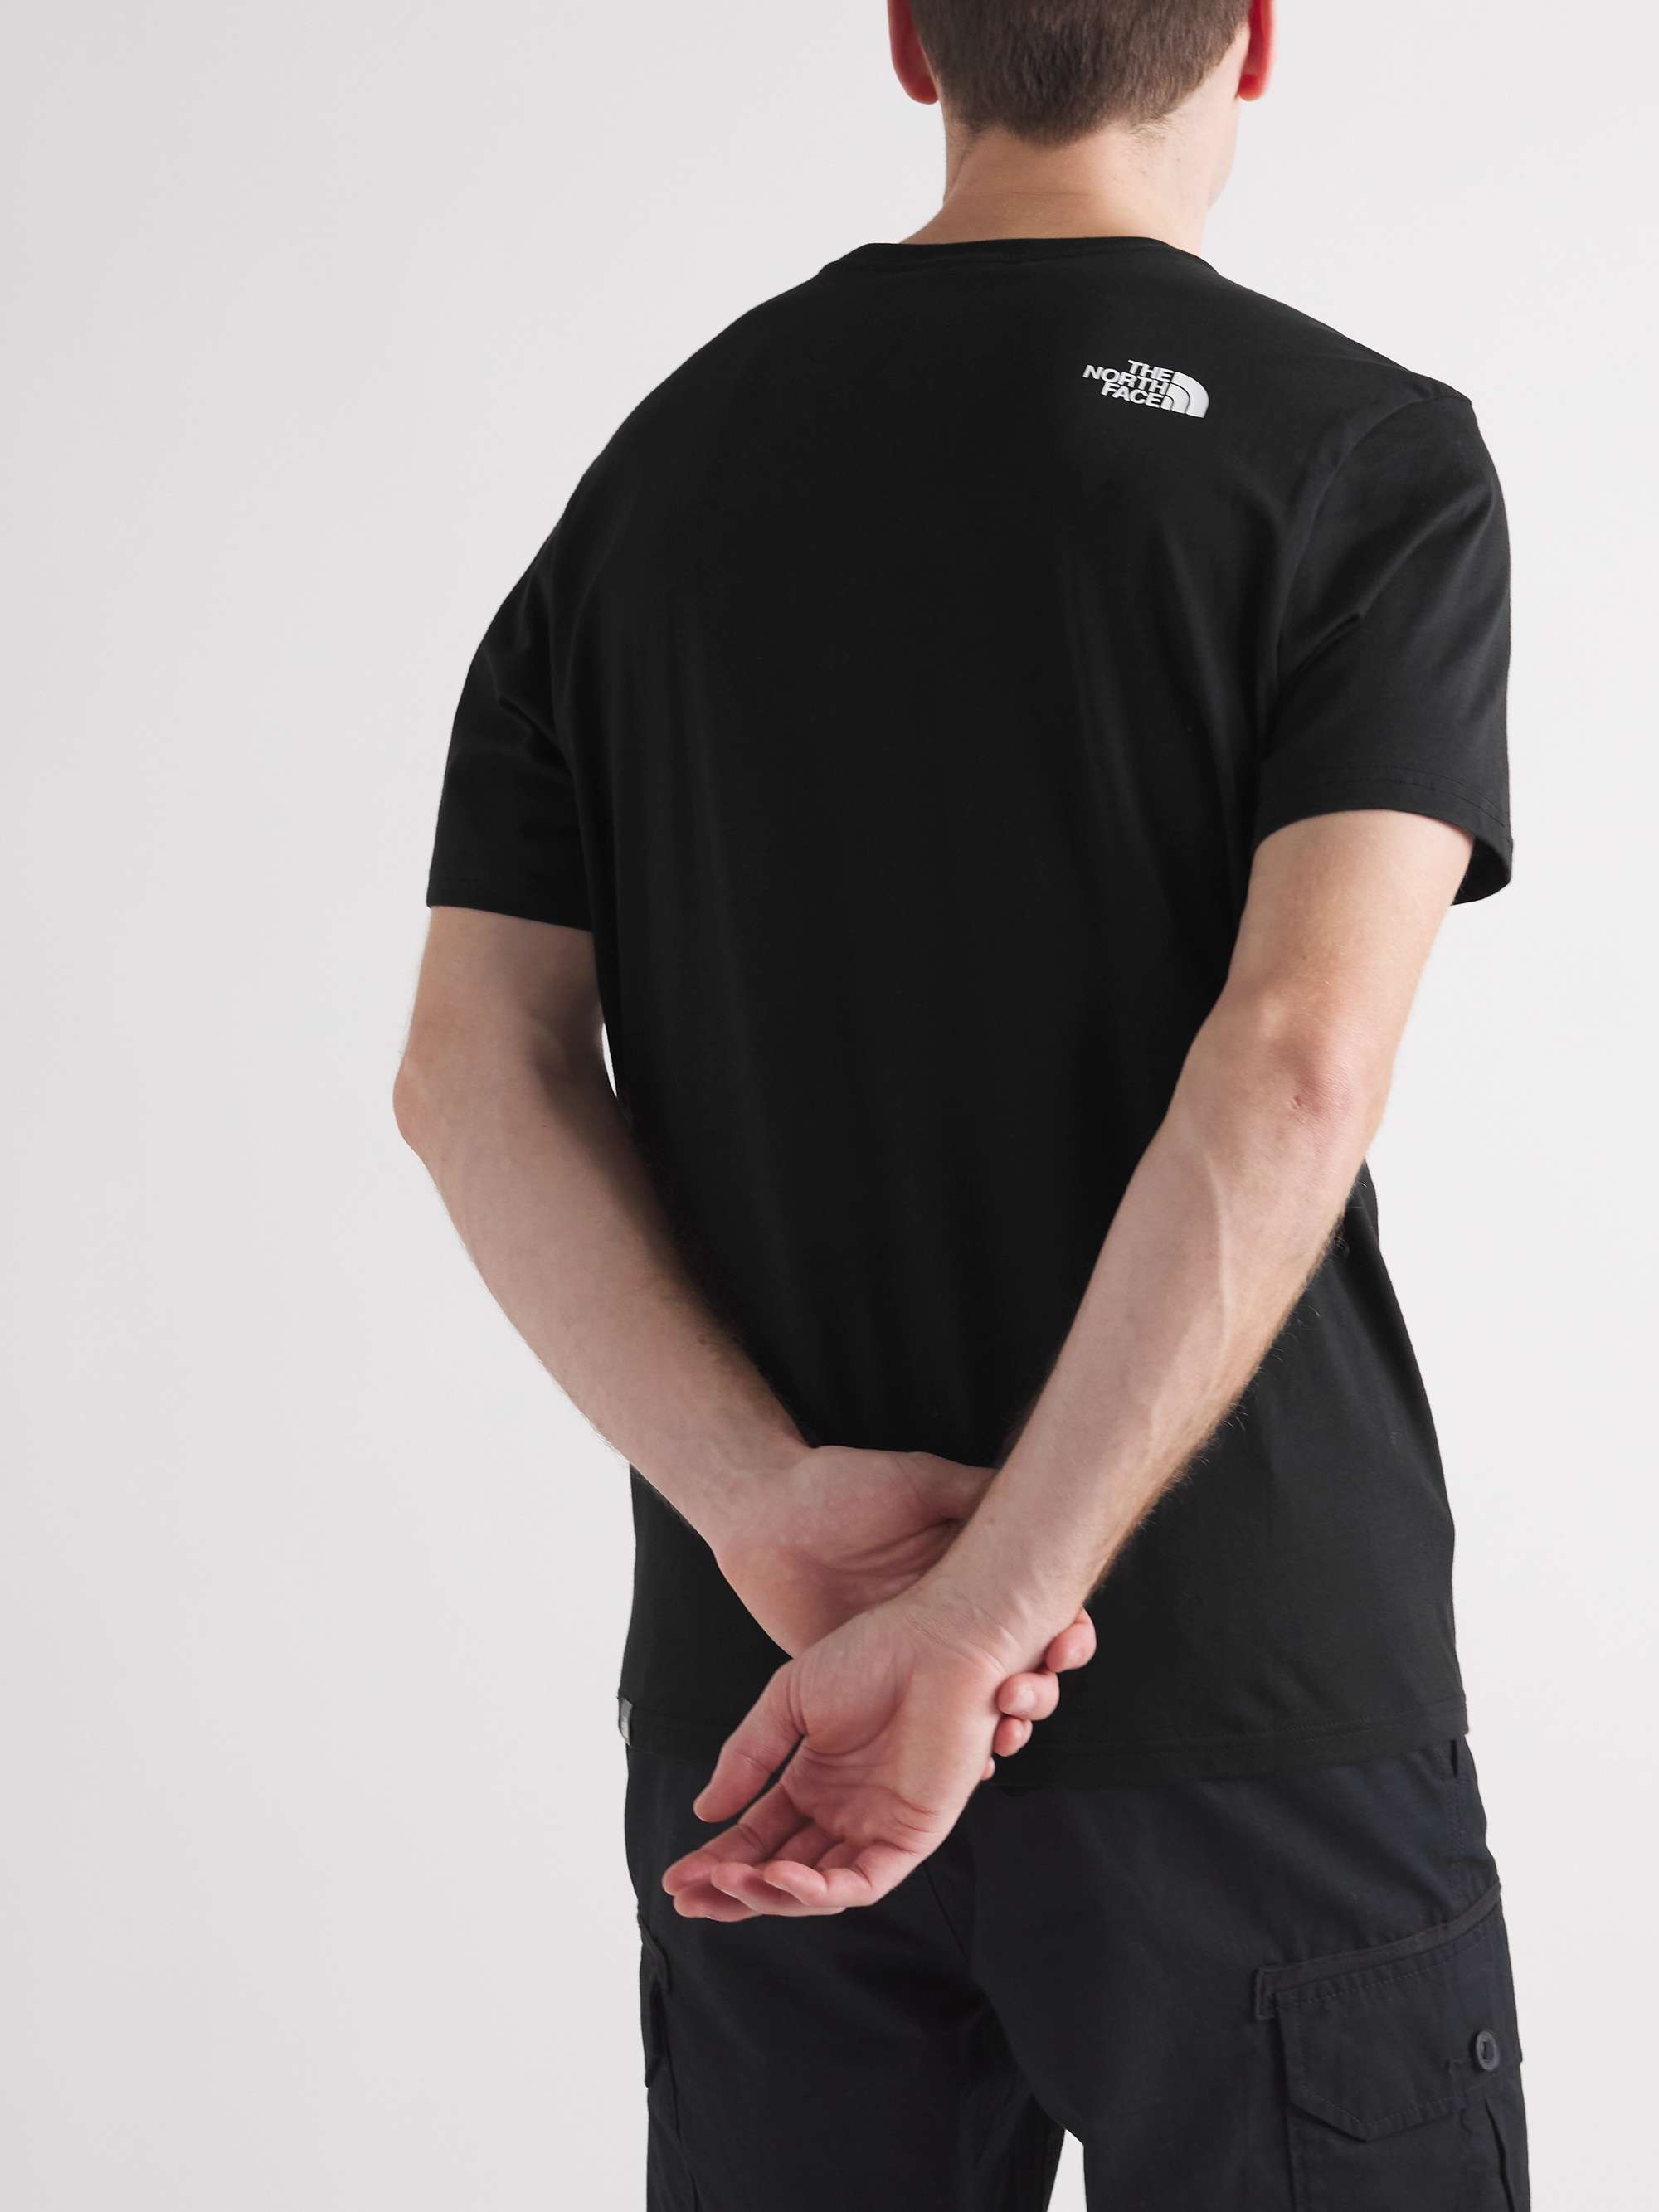 THE NORTH FACE Printed Cotton-Jersey T-Shirt